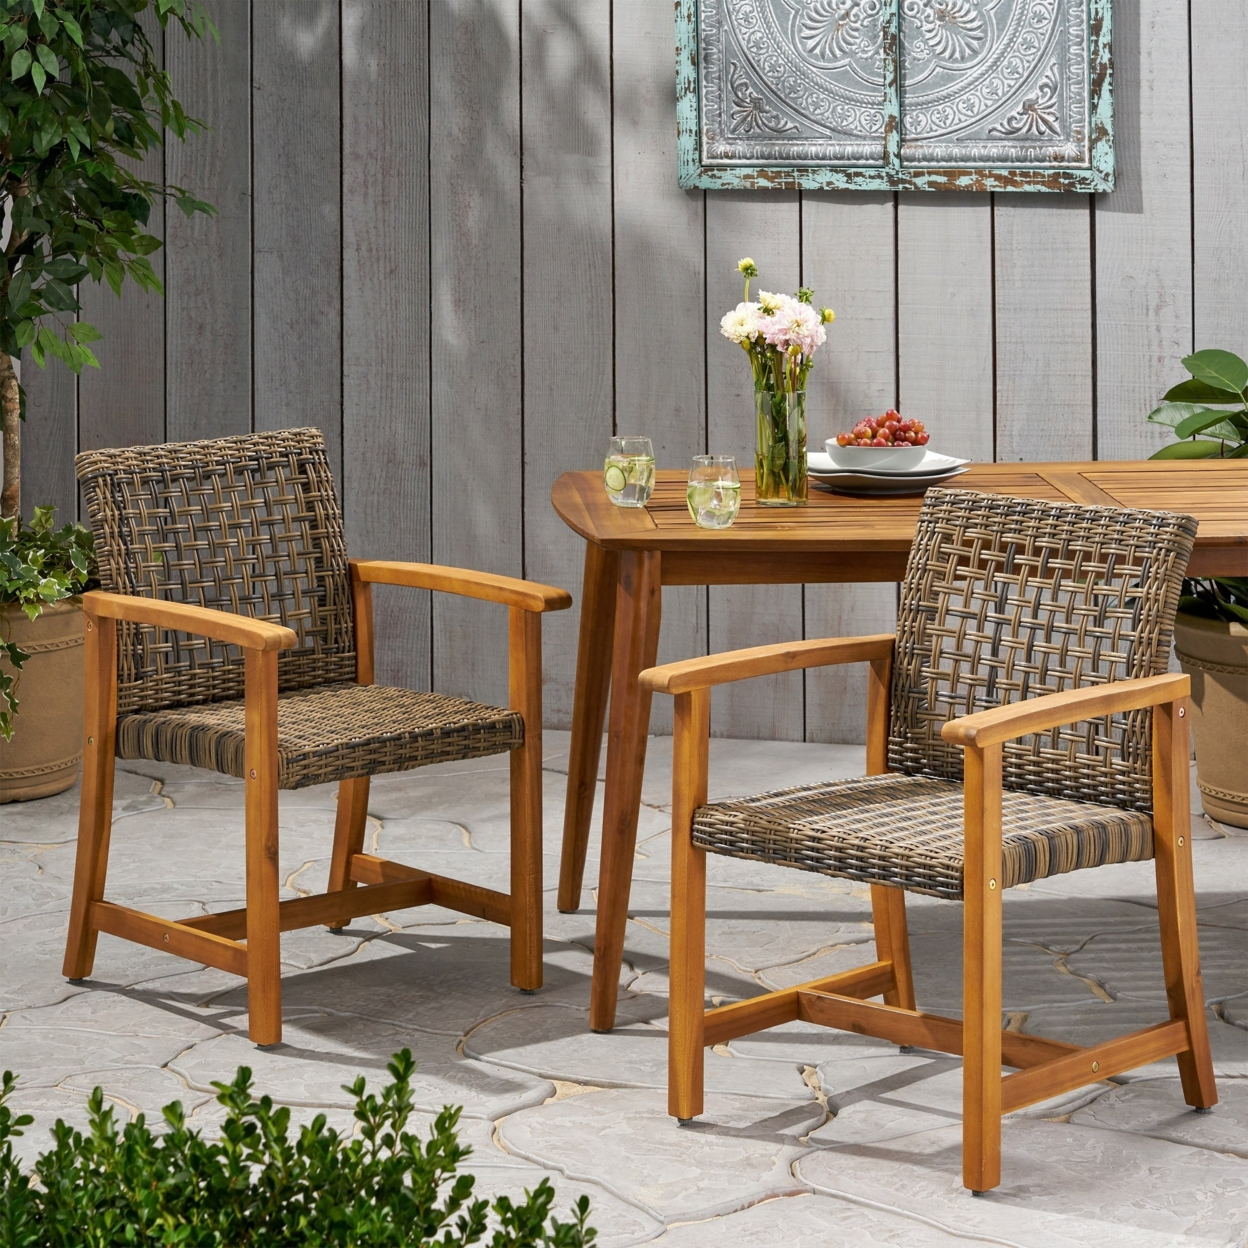 Alyssa Outdoor Acacia Wood And Wicker Dining Chair (Set Of 2) - Light Gray Wash / Mix Black